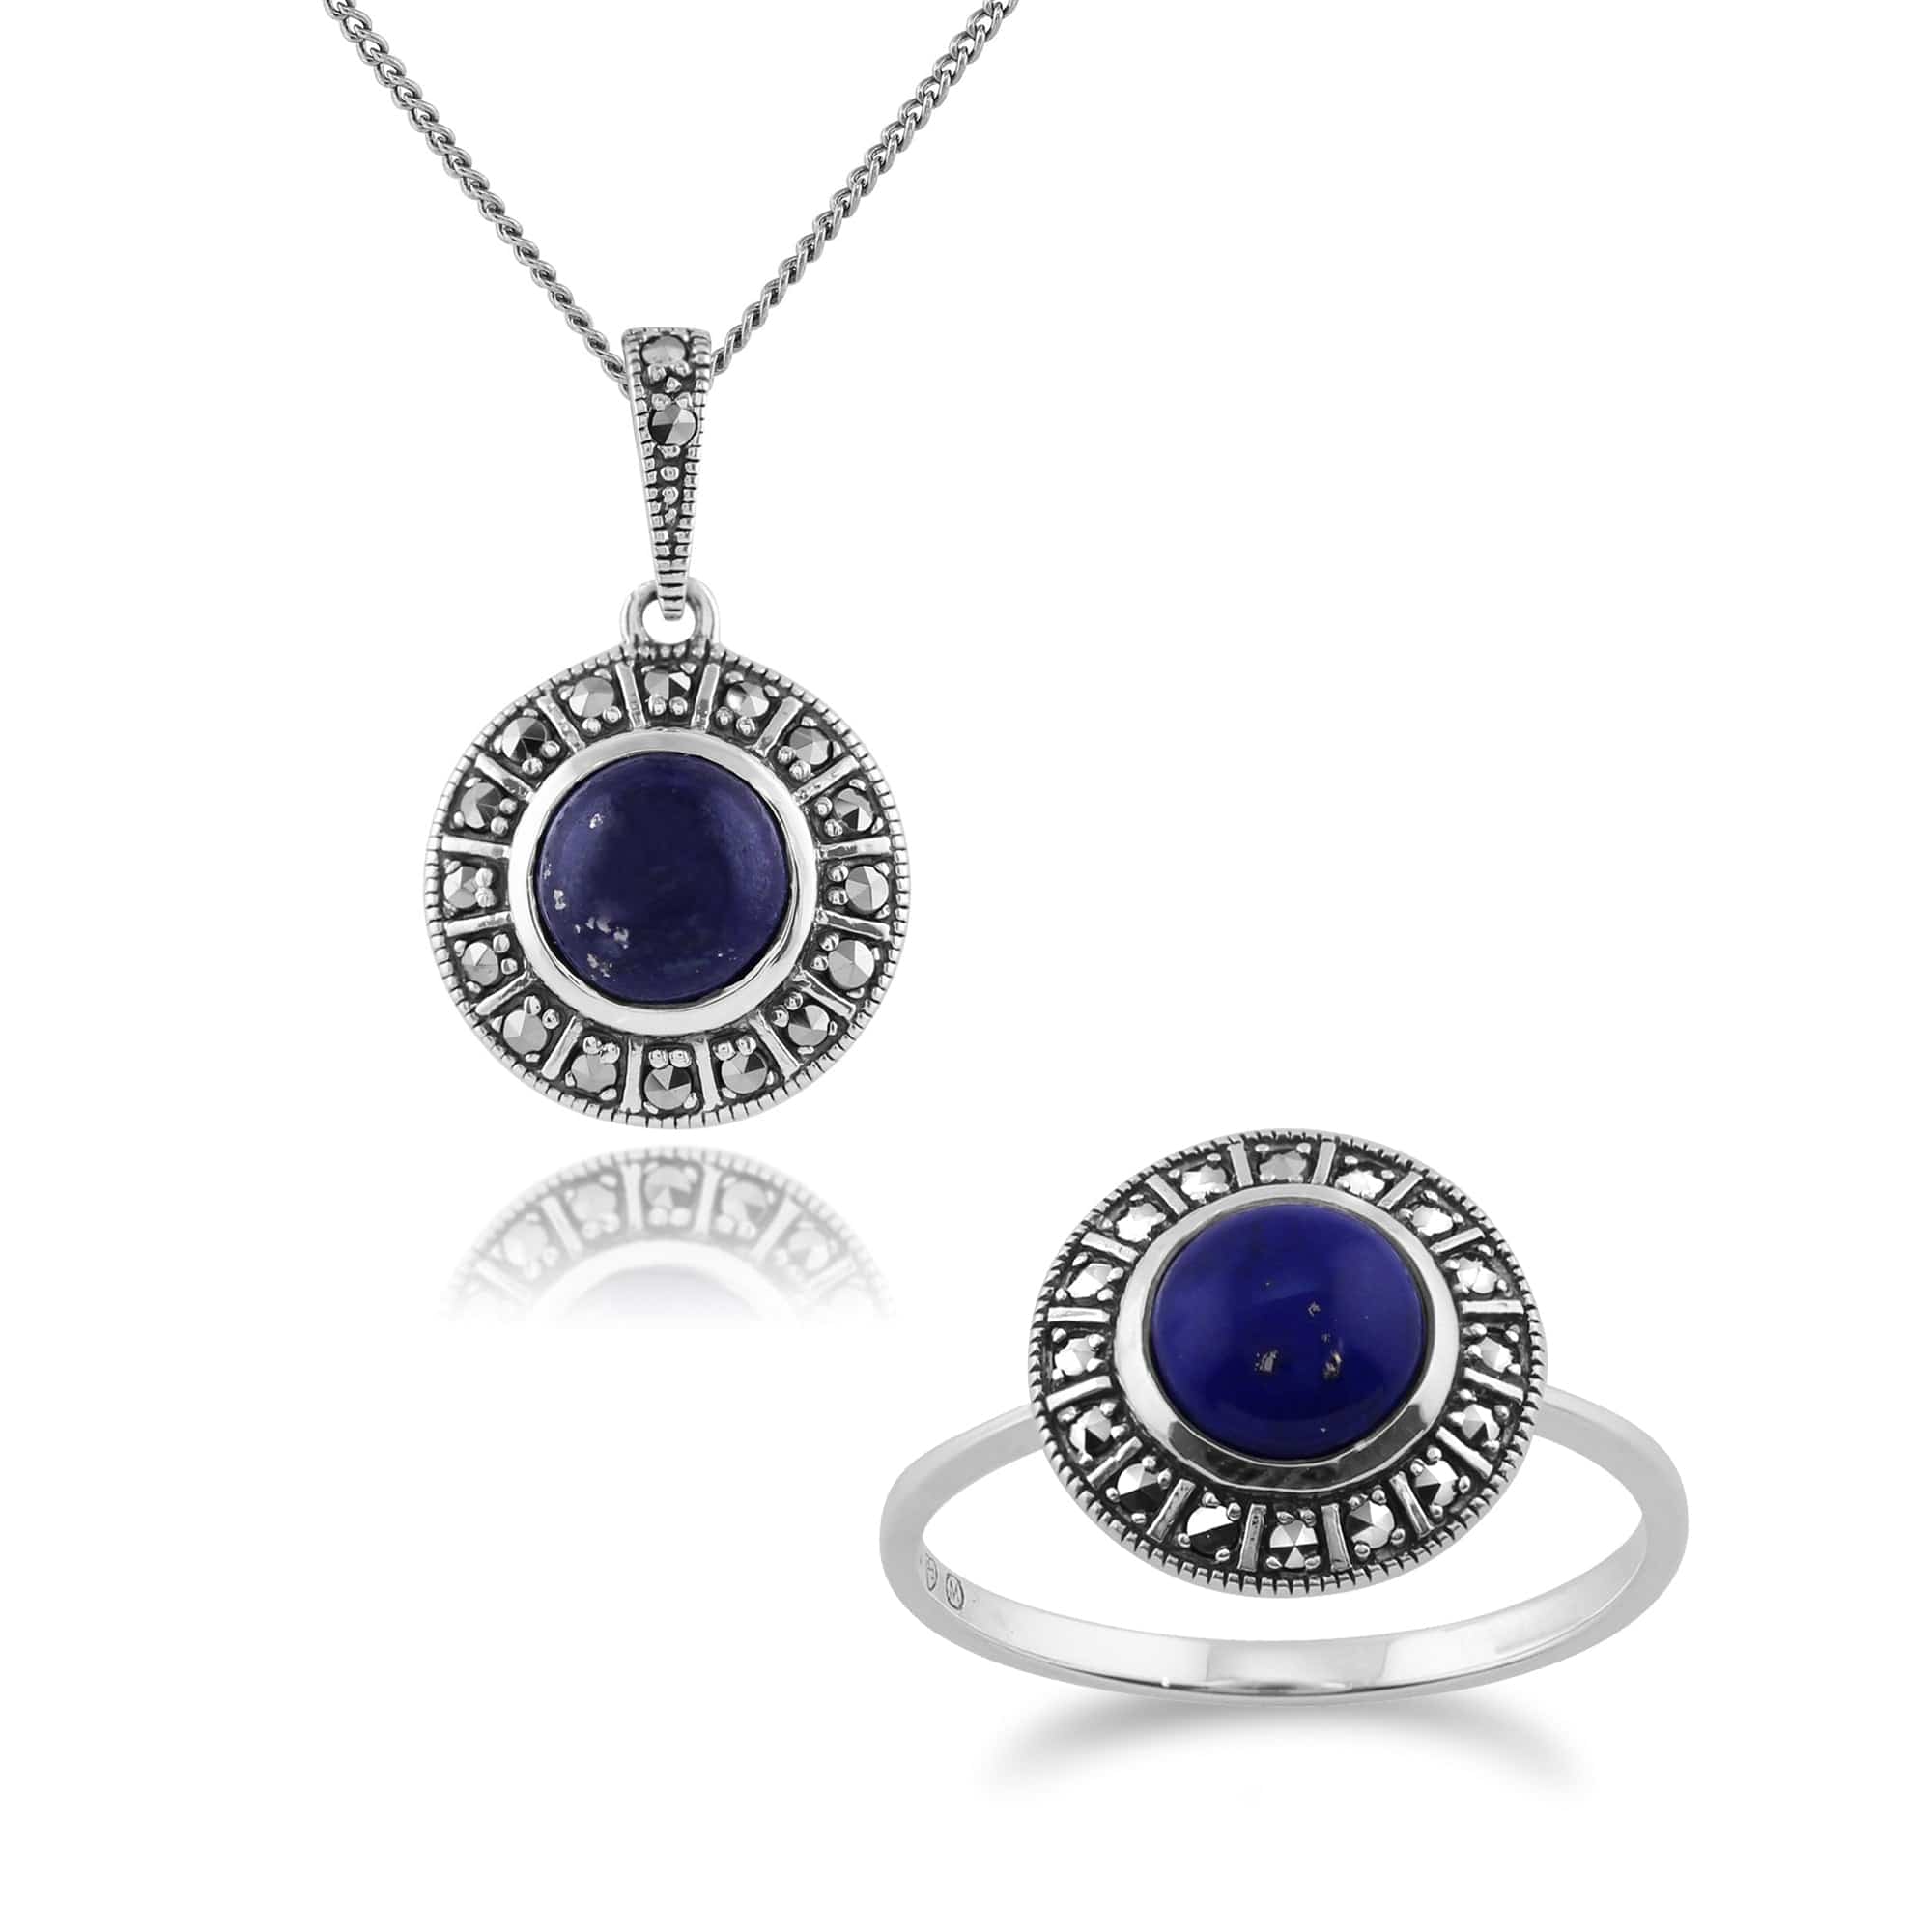 214N646503925-214R513408925 Art Deco Style Round Lapis Lazuli & Marcasite Halo Pendant & Ring Set in 925 Sterling Silver 1